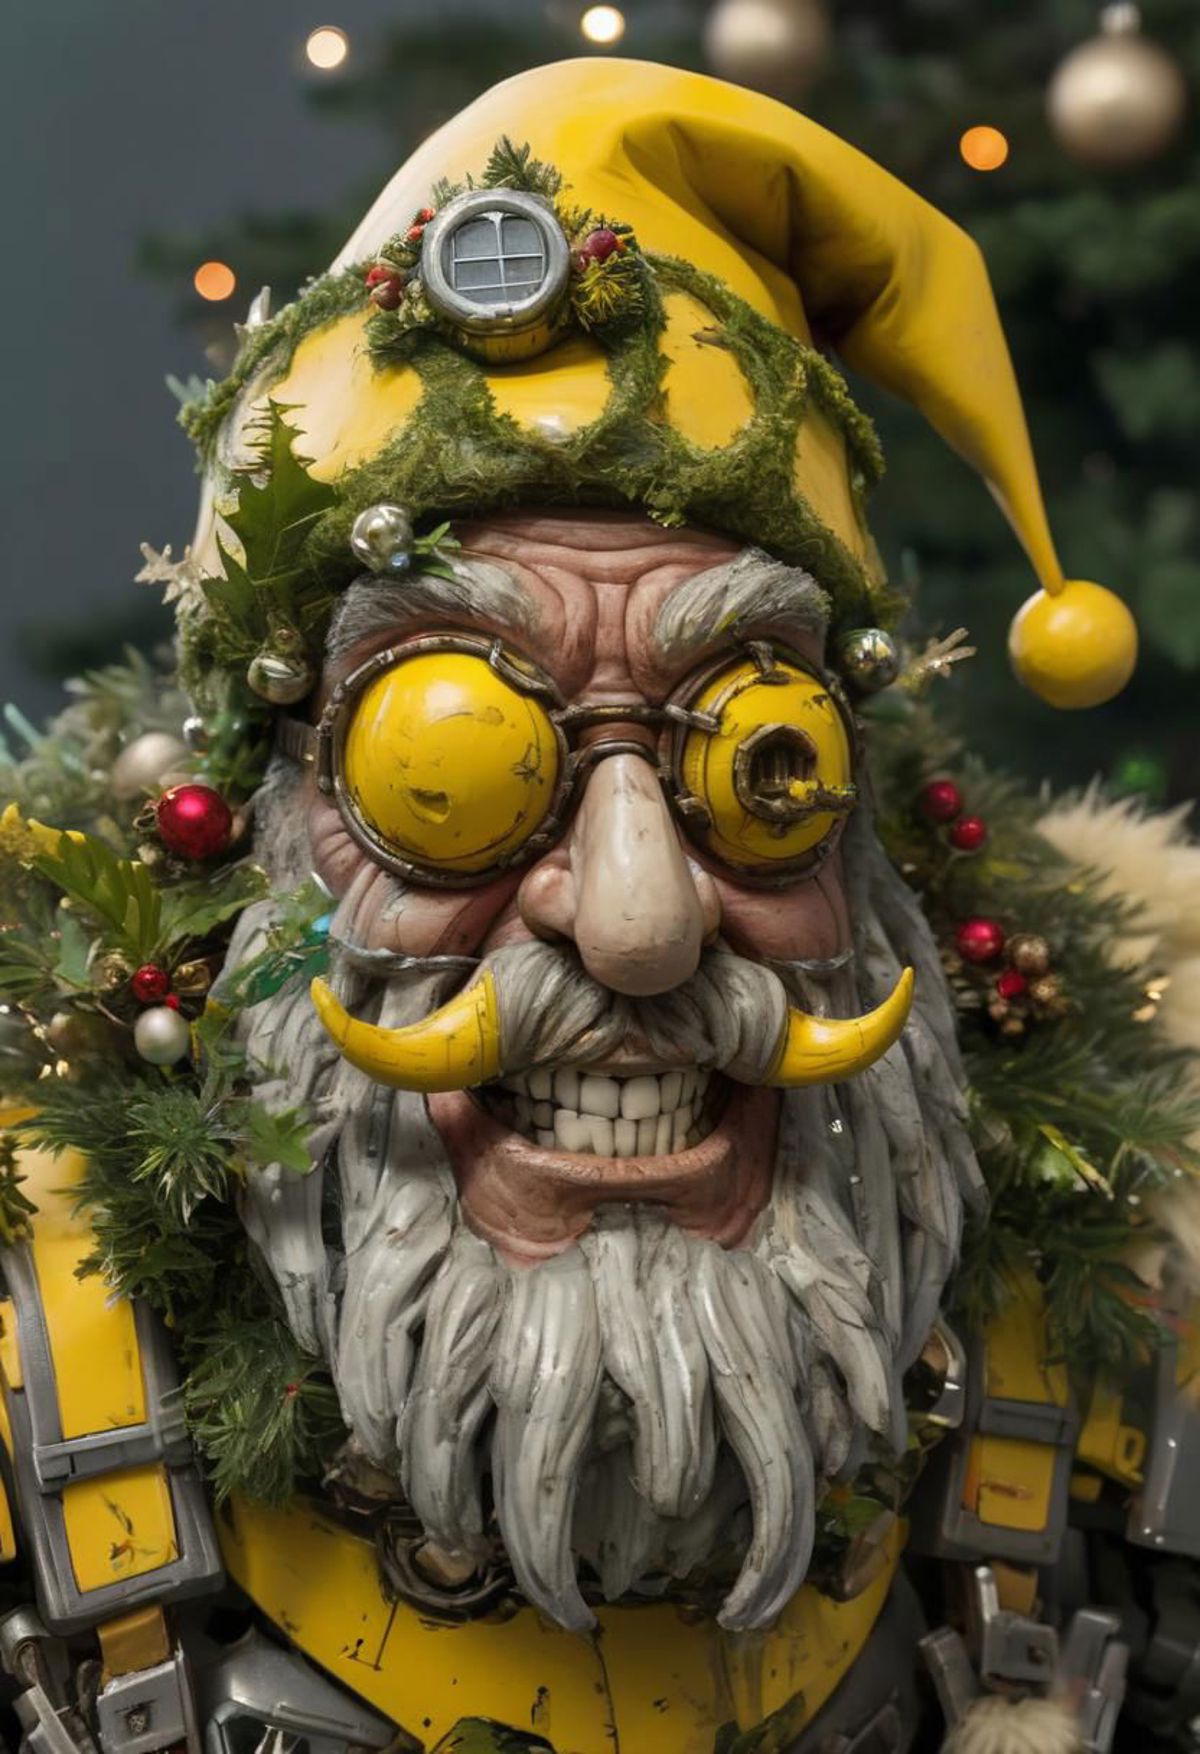 A Christmas-themed statue wearing glasses and a hat.